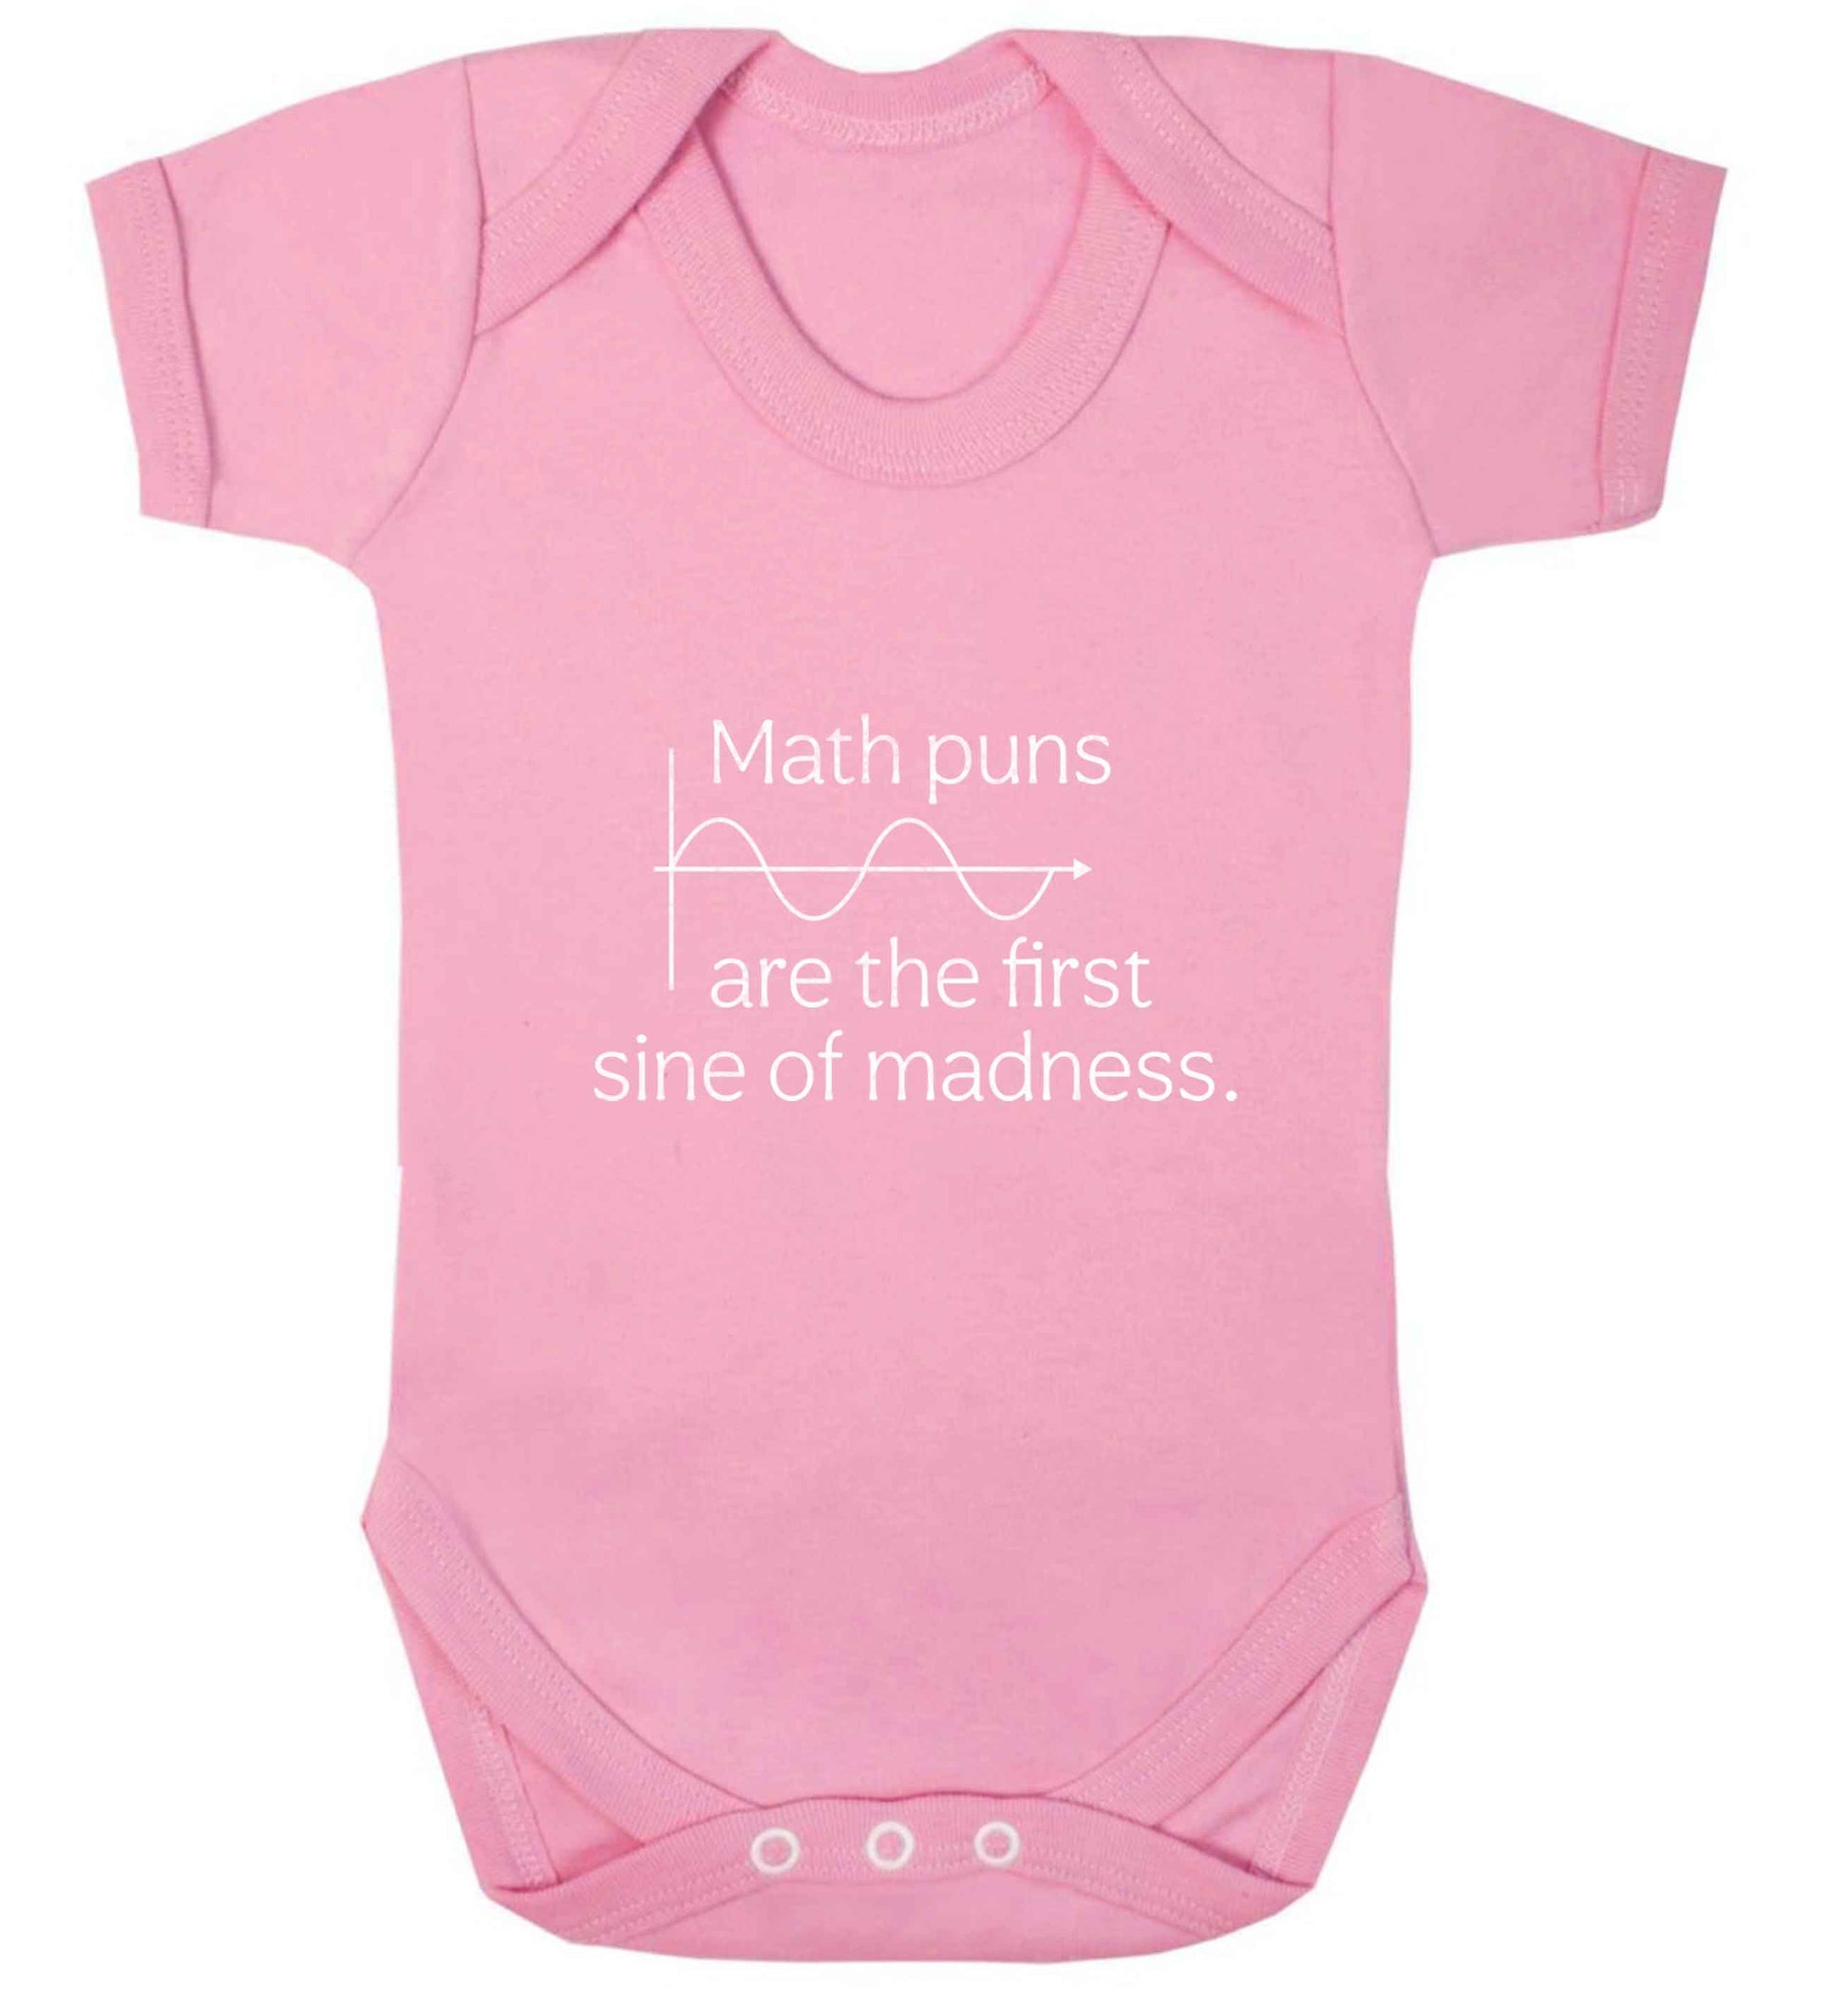 Math puns are the first sine of madness baby vest pale pink 18-24 months